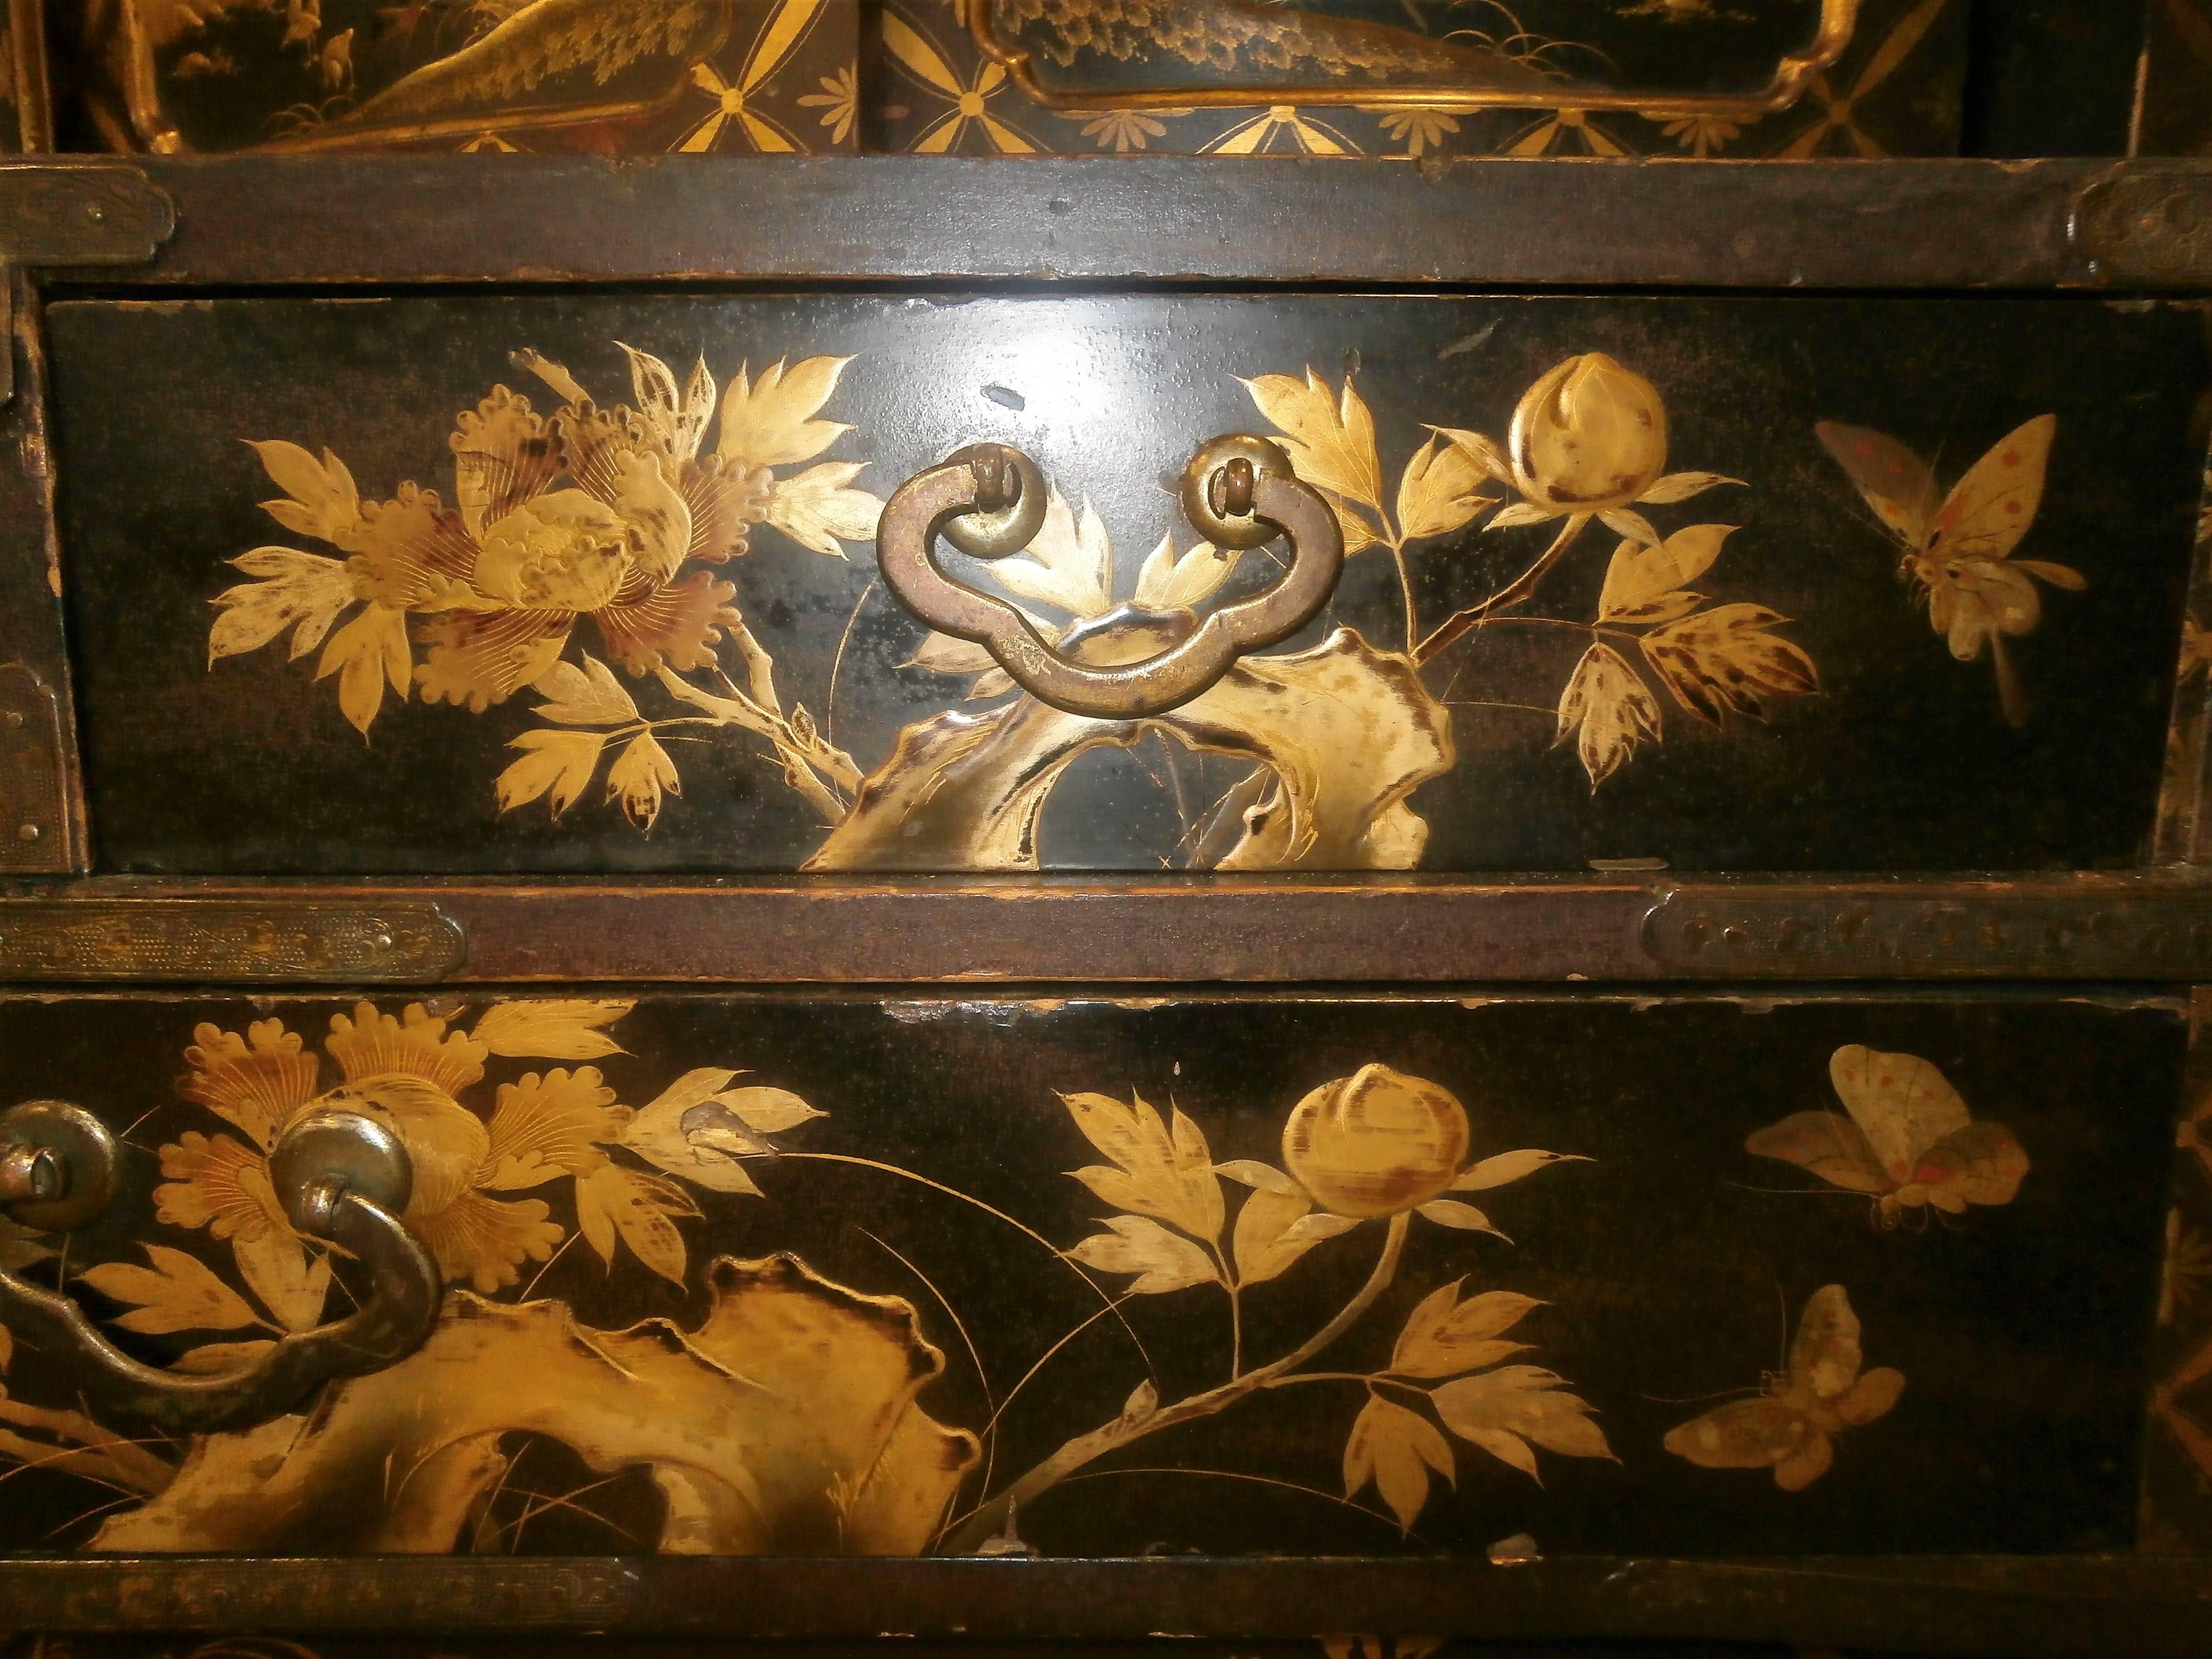 Unique 19th century Japanese cabinet, lacquered cabinet in all sides.
Decorated with the ancient Maki-e Technic using gold powder, silver powder or inlaid bronze in the ornaments even used inside the drawers, which shows the high quality of this